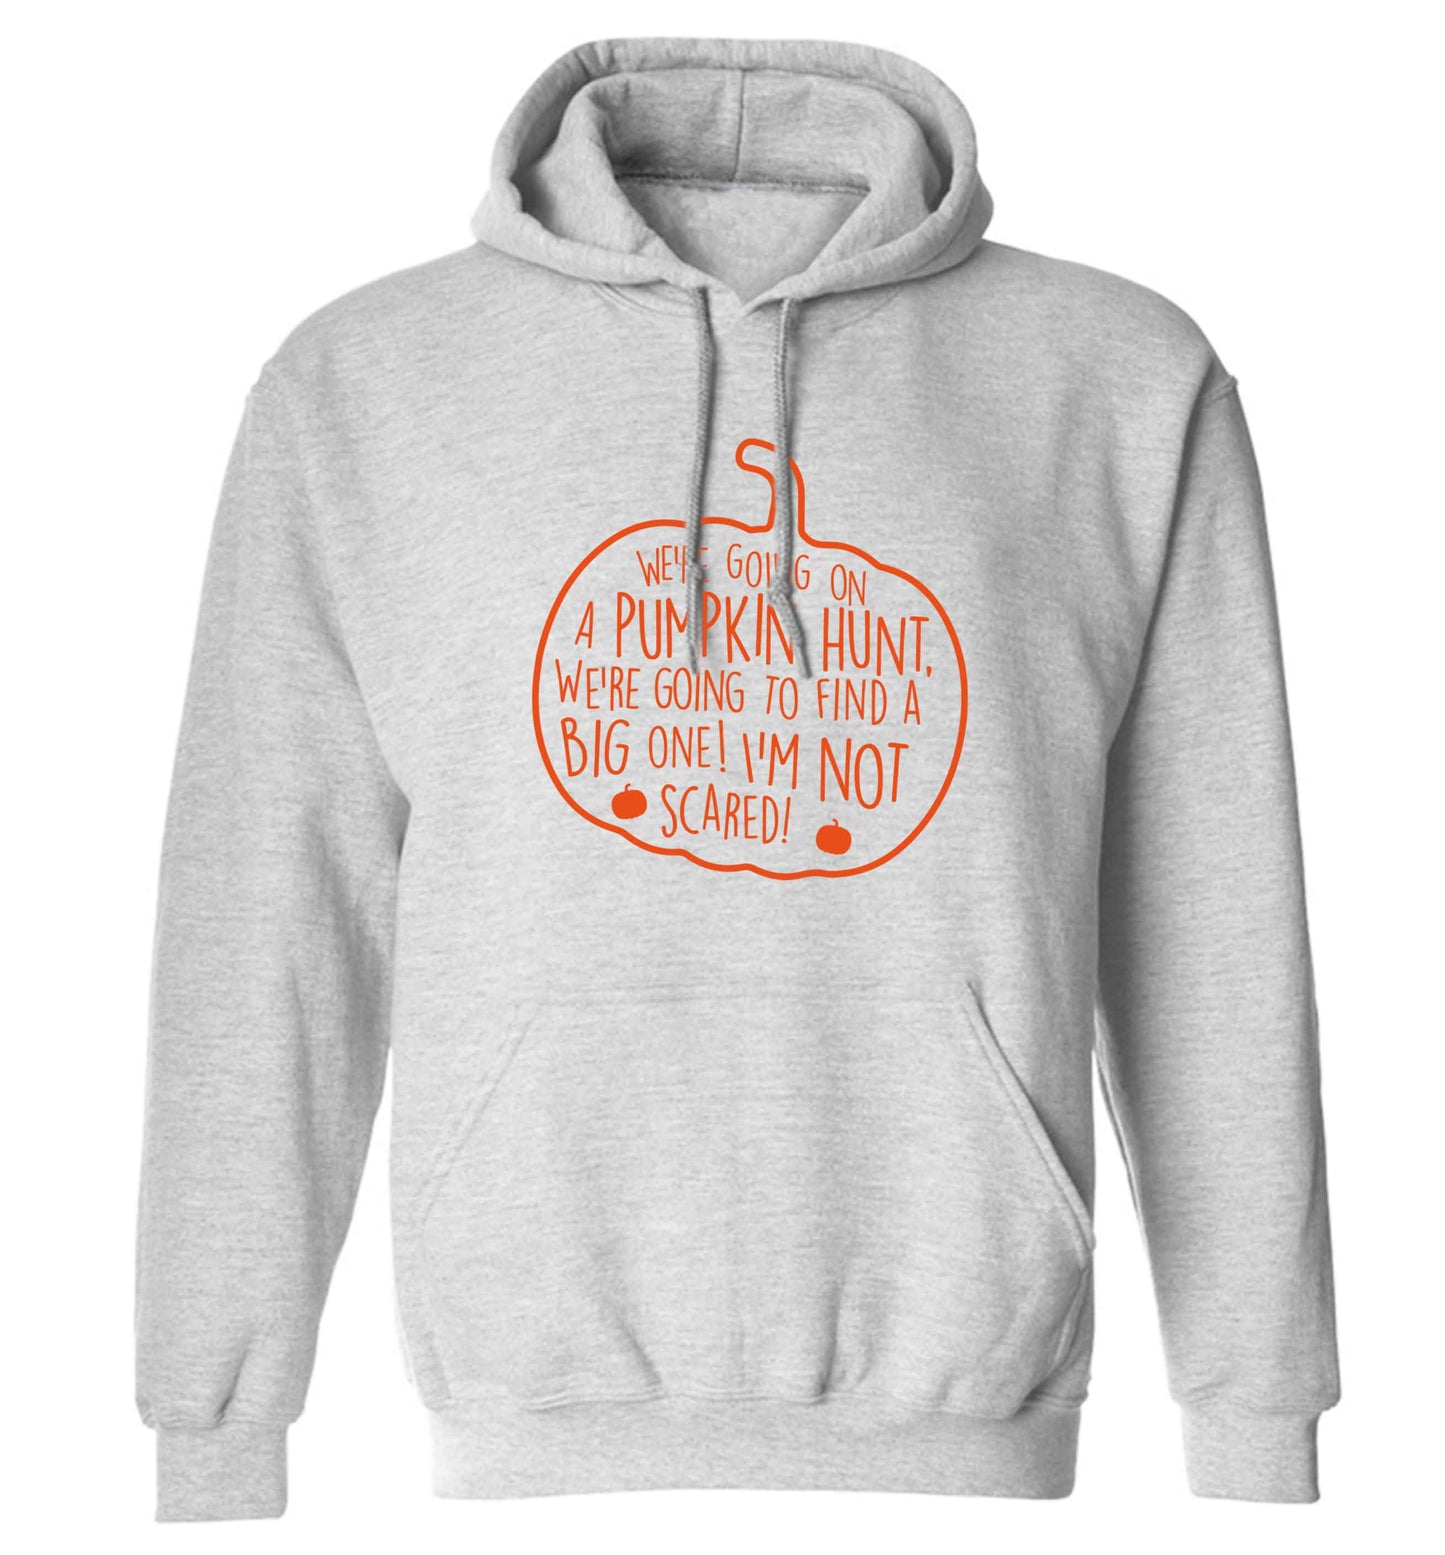 We're going on a pumpkin hunt adults unisex grey hoodie 2XL